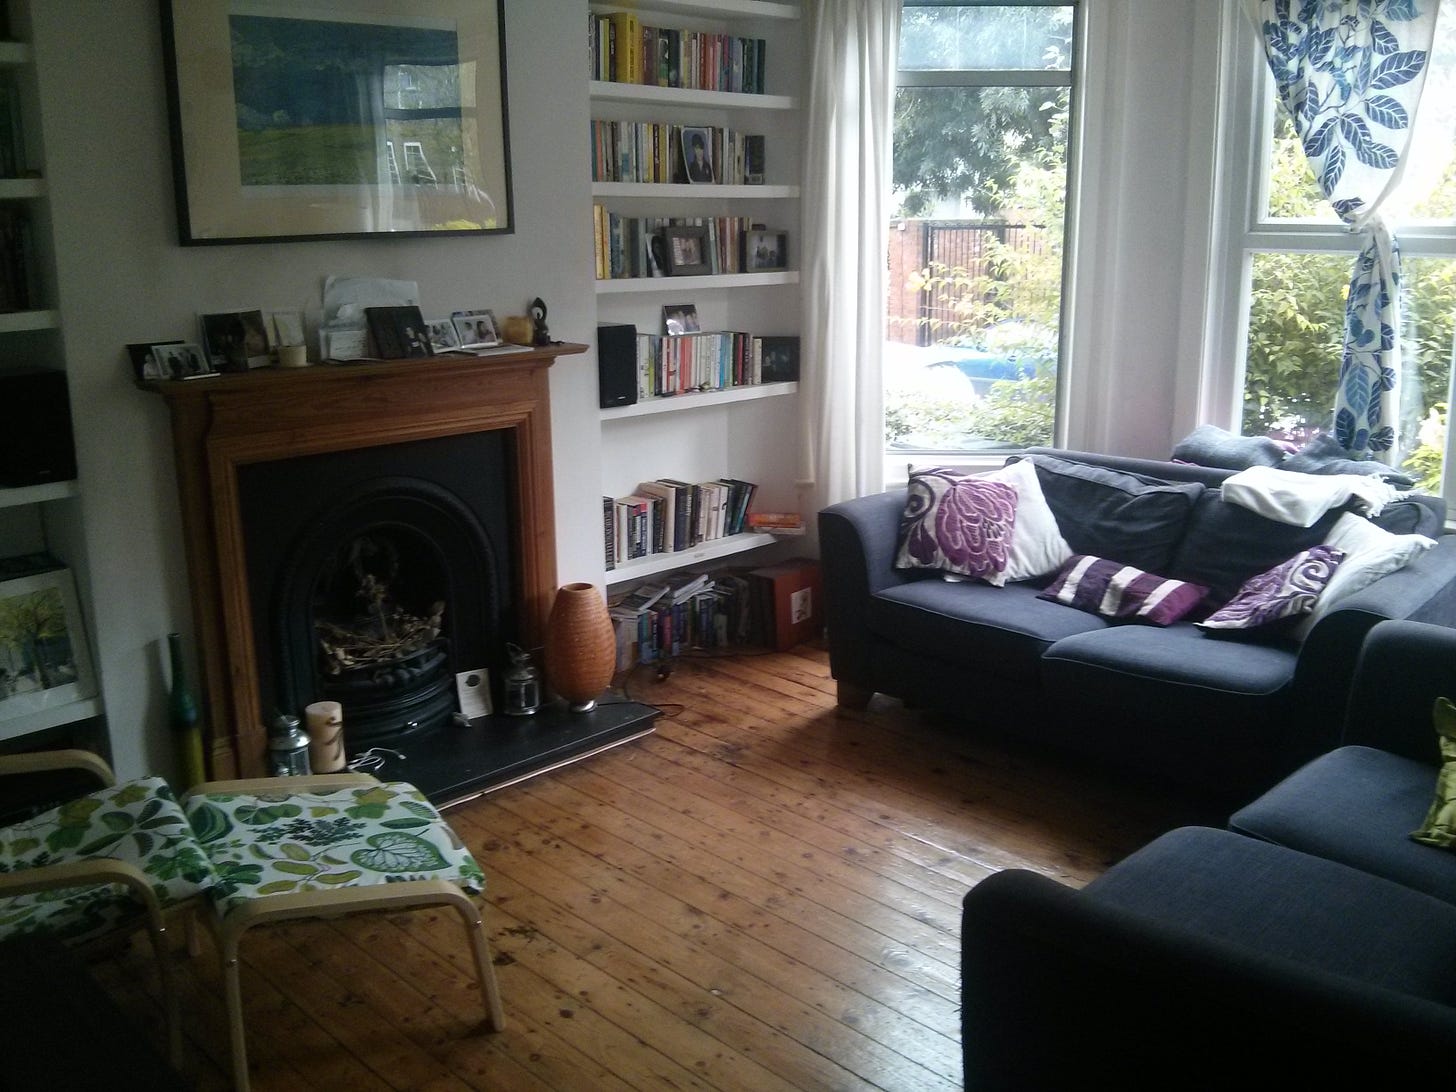 Photo of our old lounge in our Haringey flat - two sofas, wood floors, fireplace, and lots of bookshelves